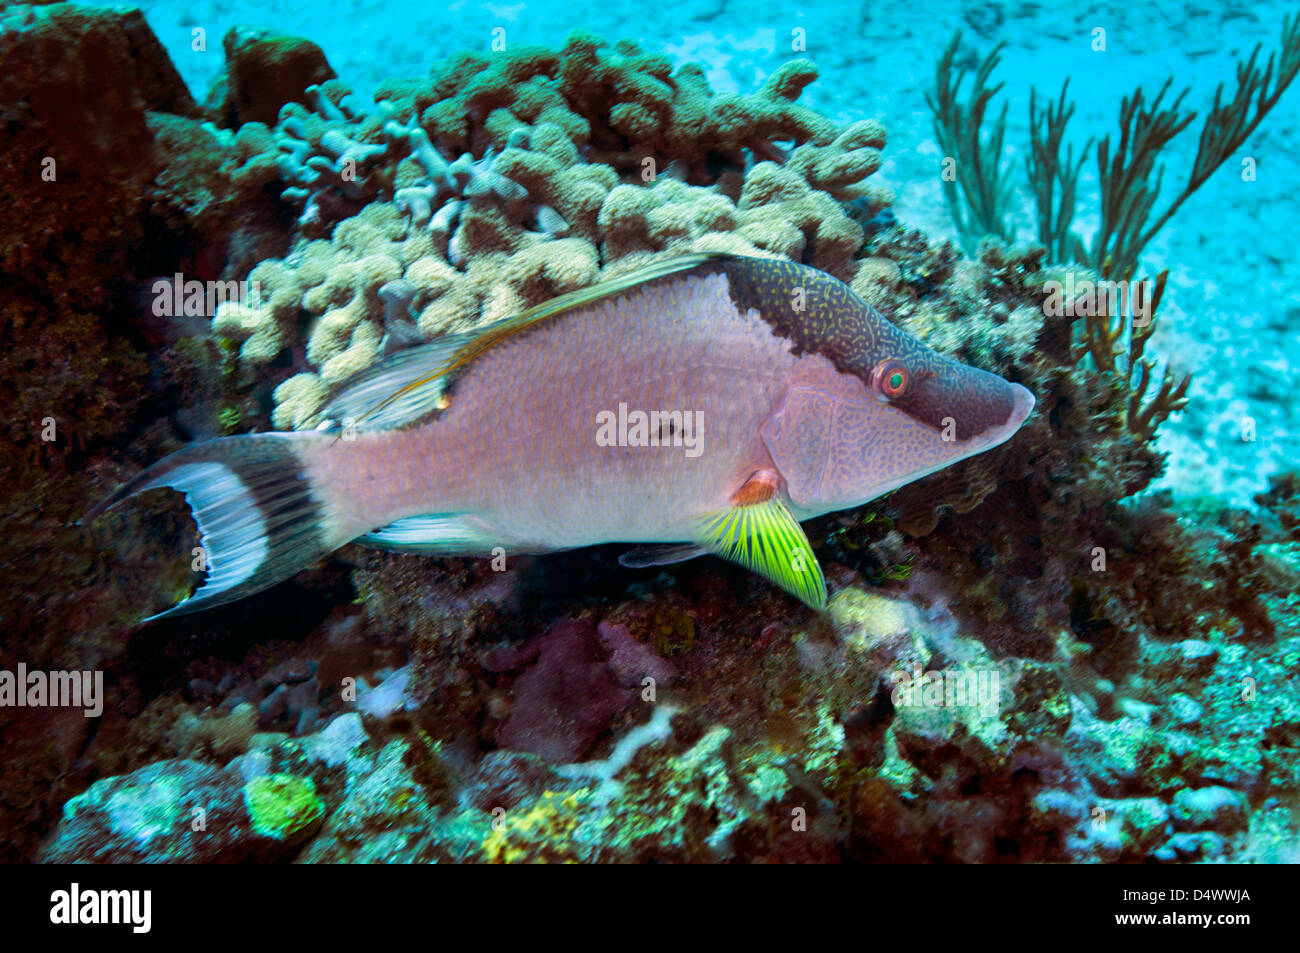 A Hogfish (Lachnolaimus maximus) swimming above a coral reef offshore of Grand Cayman Island. Stock Photo